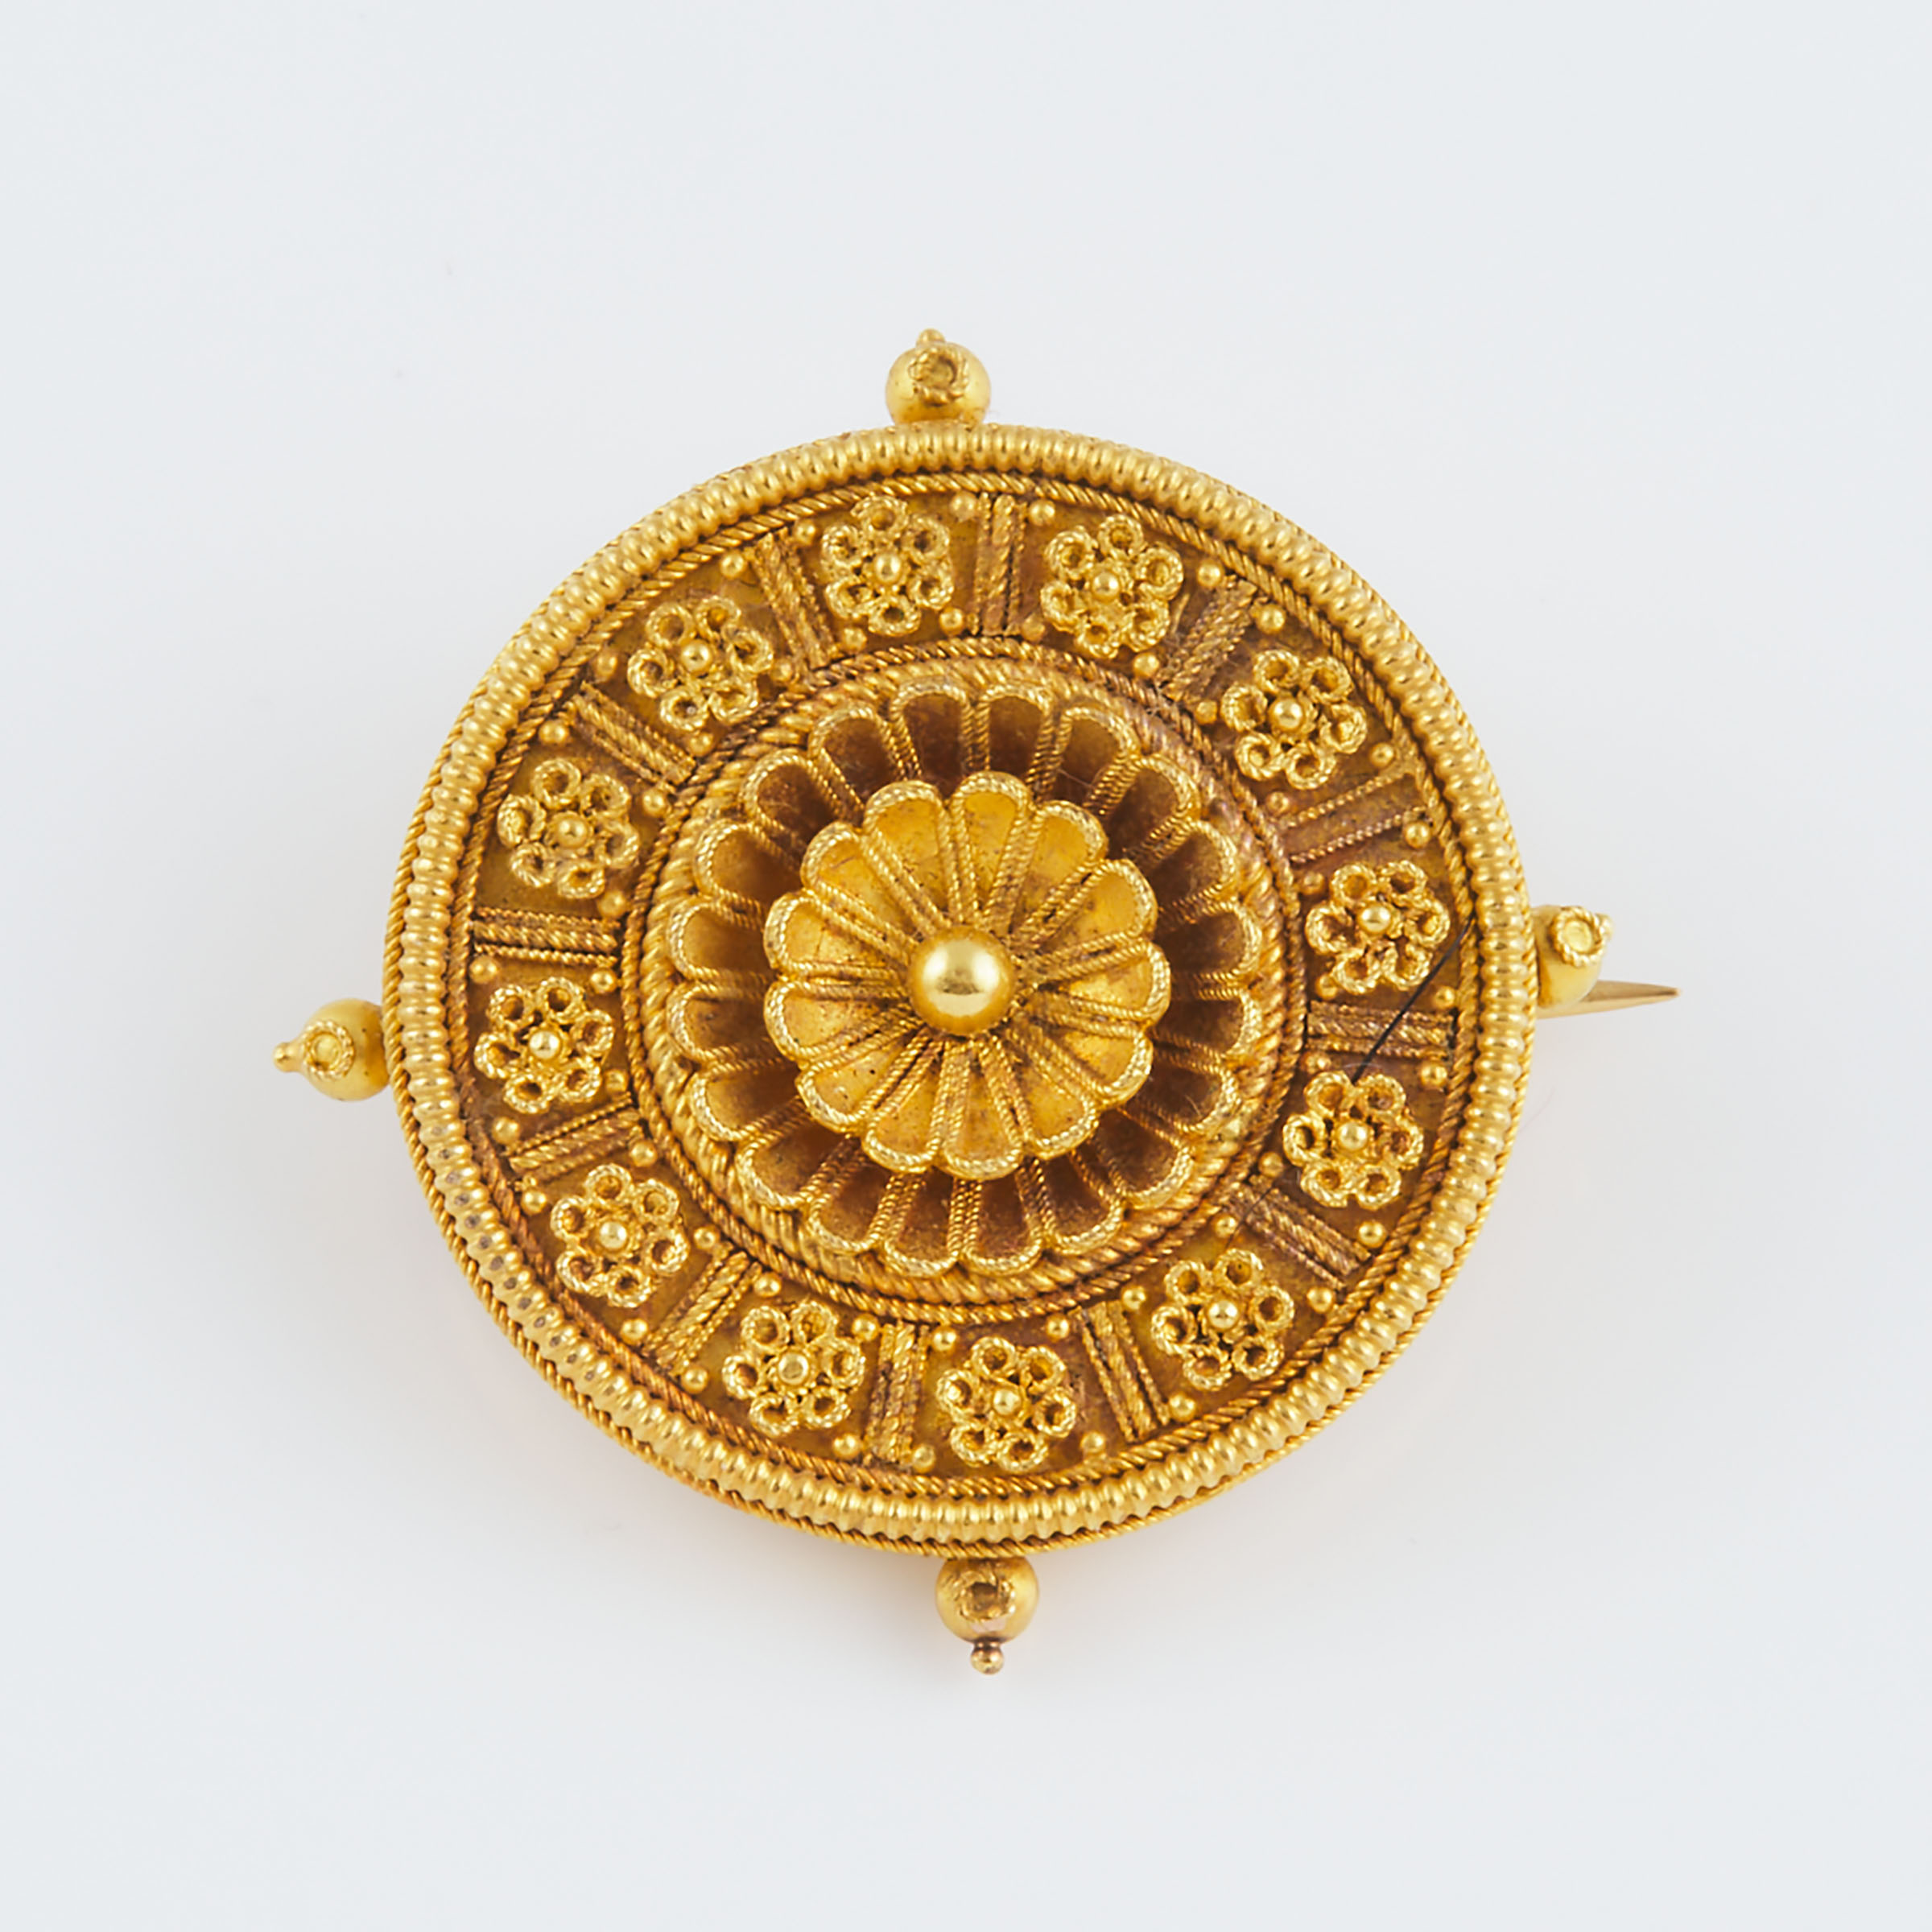 19th Century Etruscan Revival 18k Yellow Gold Brooch